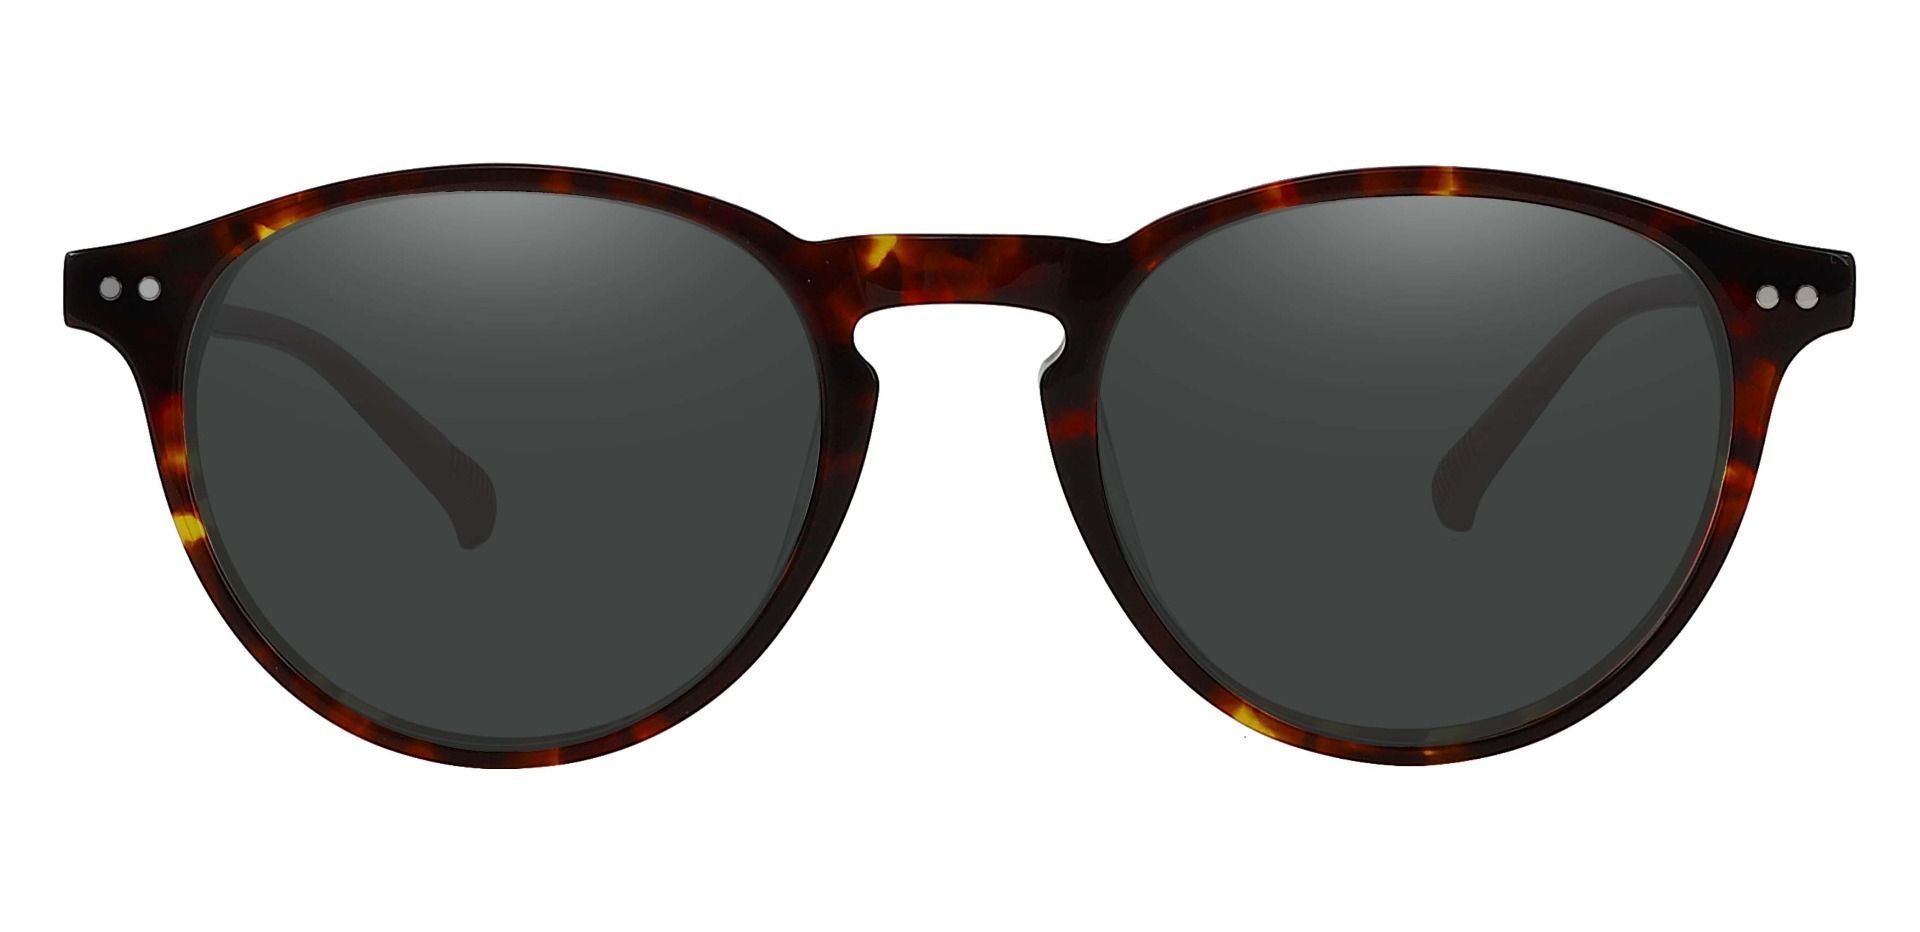 Monarch Oval Lined Bifocal Sunglasses - Tortoise Frame With Gray Lenses